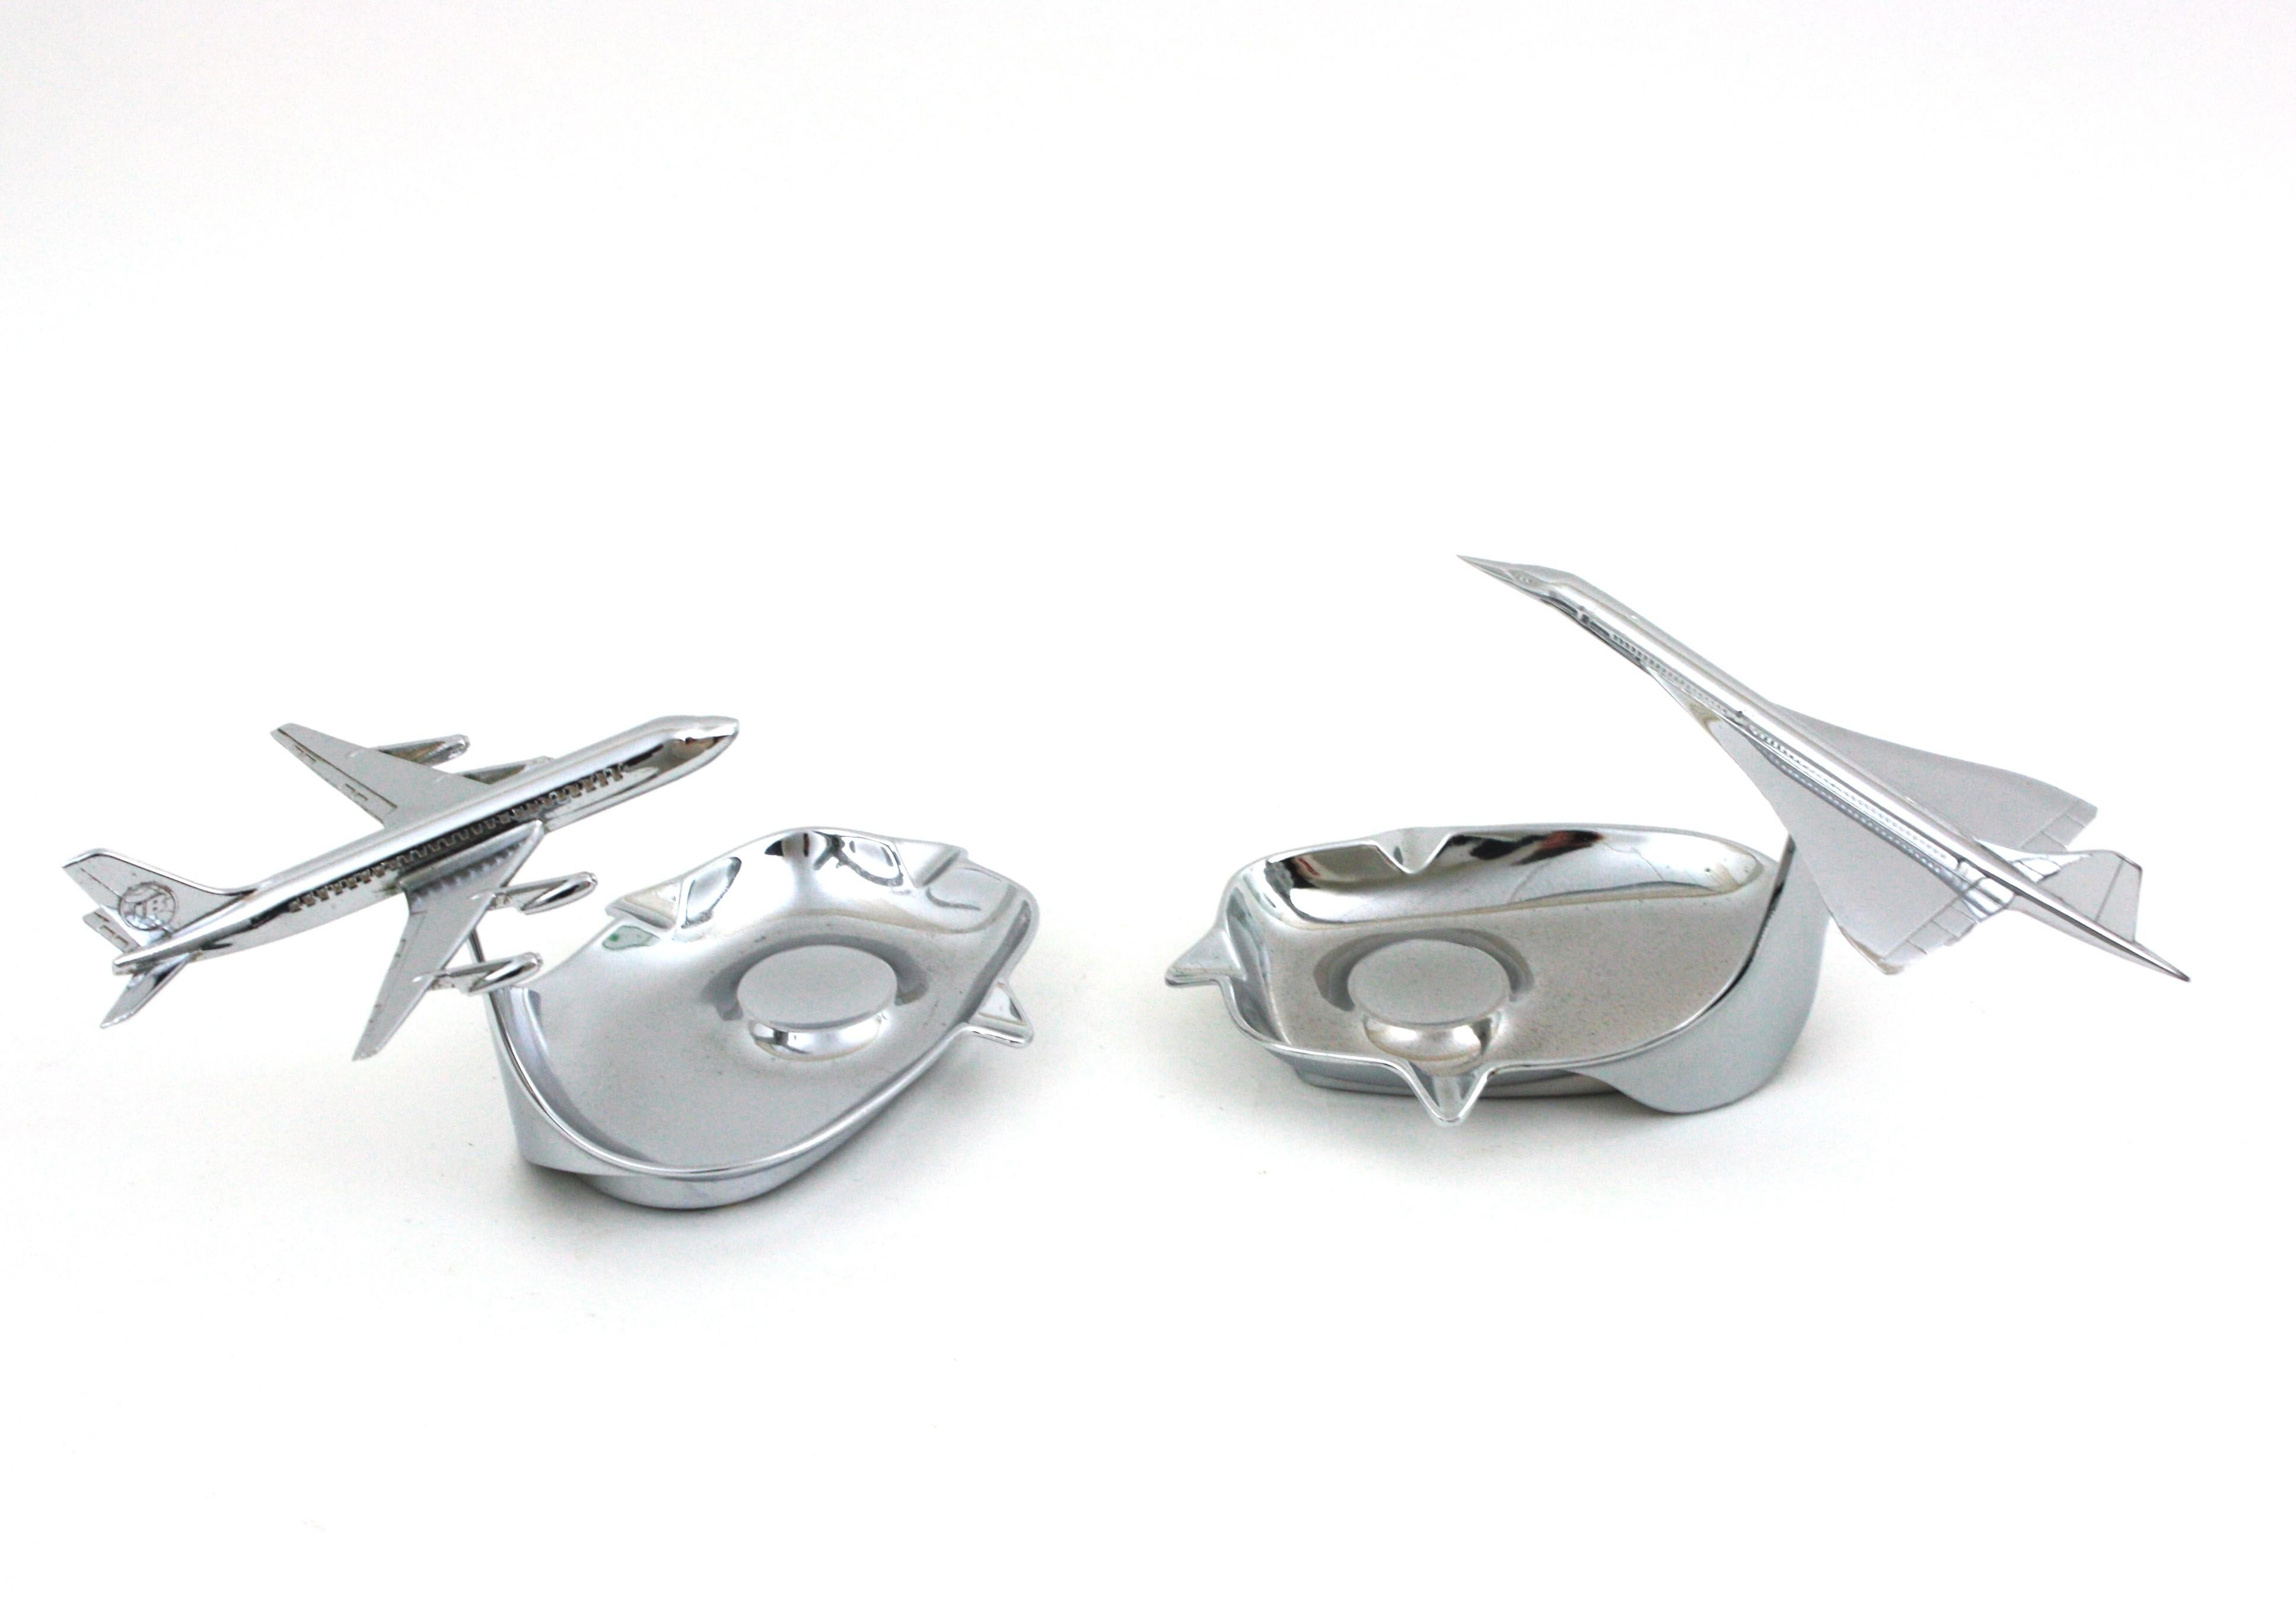 Pair of Midcentury Concorde & DC-8 Desk Model Airplane Chromed Ashtrays In Good Condition For Sale In Barcelona, ES